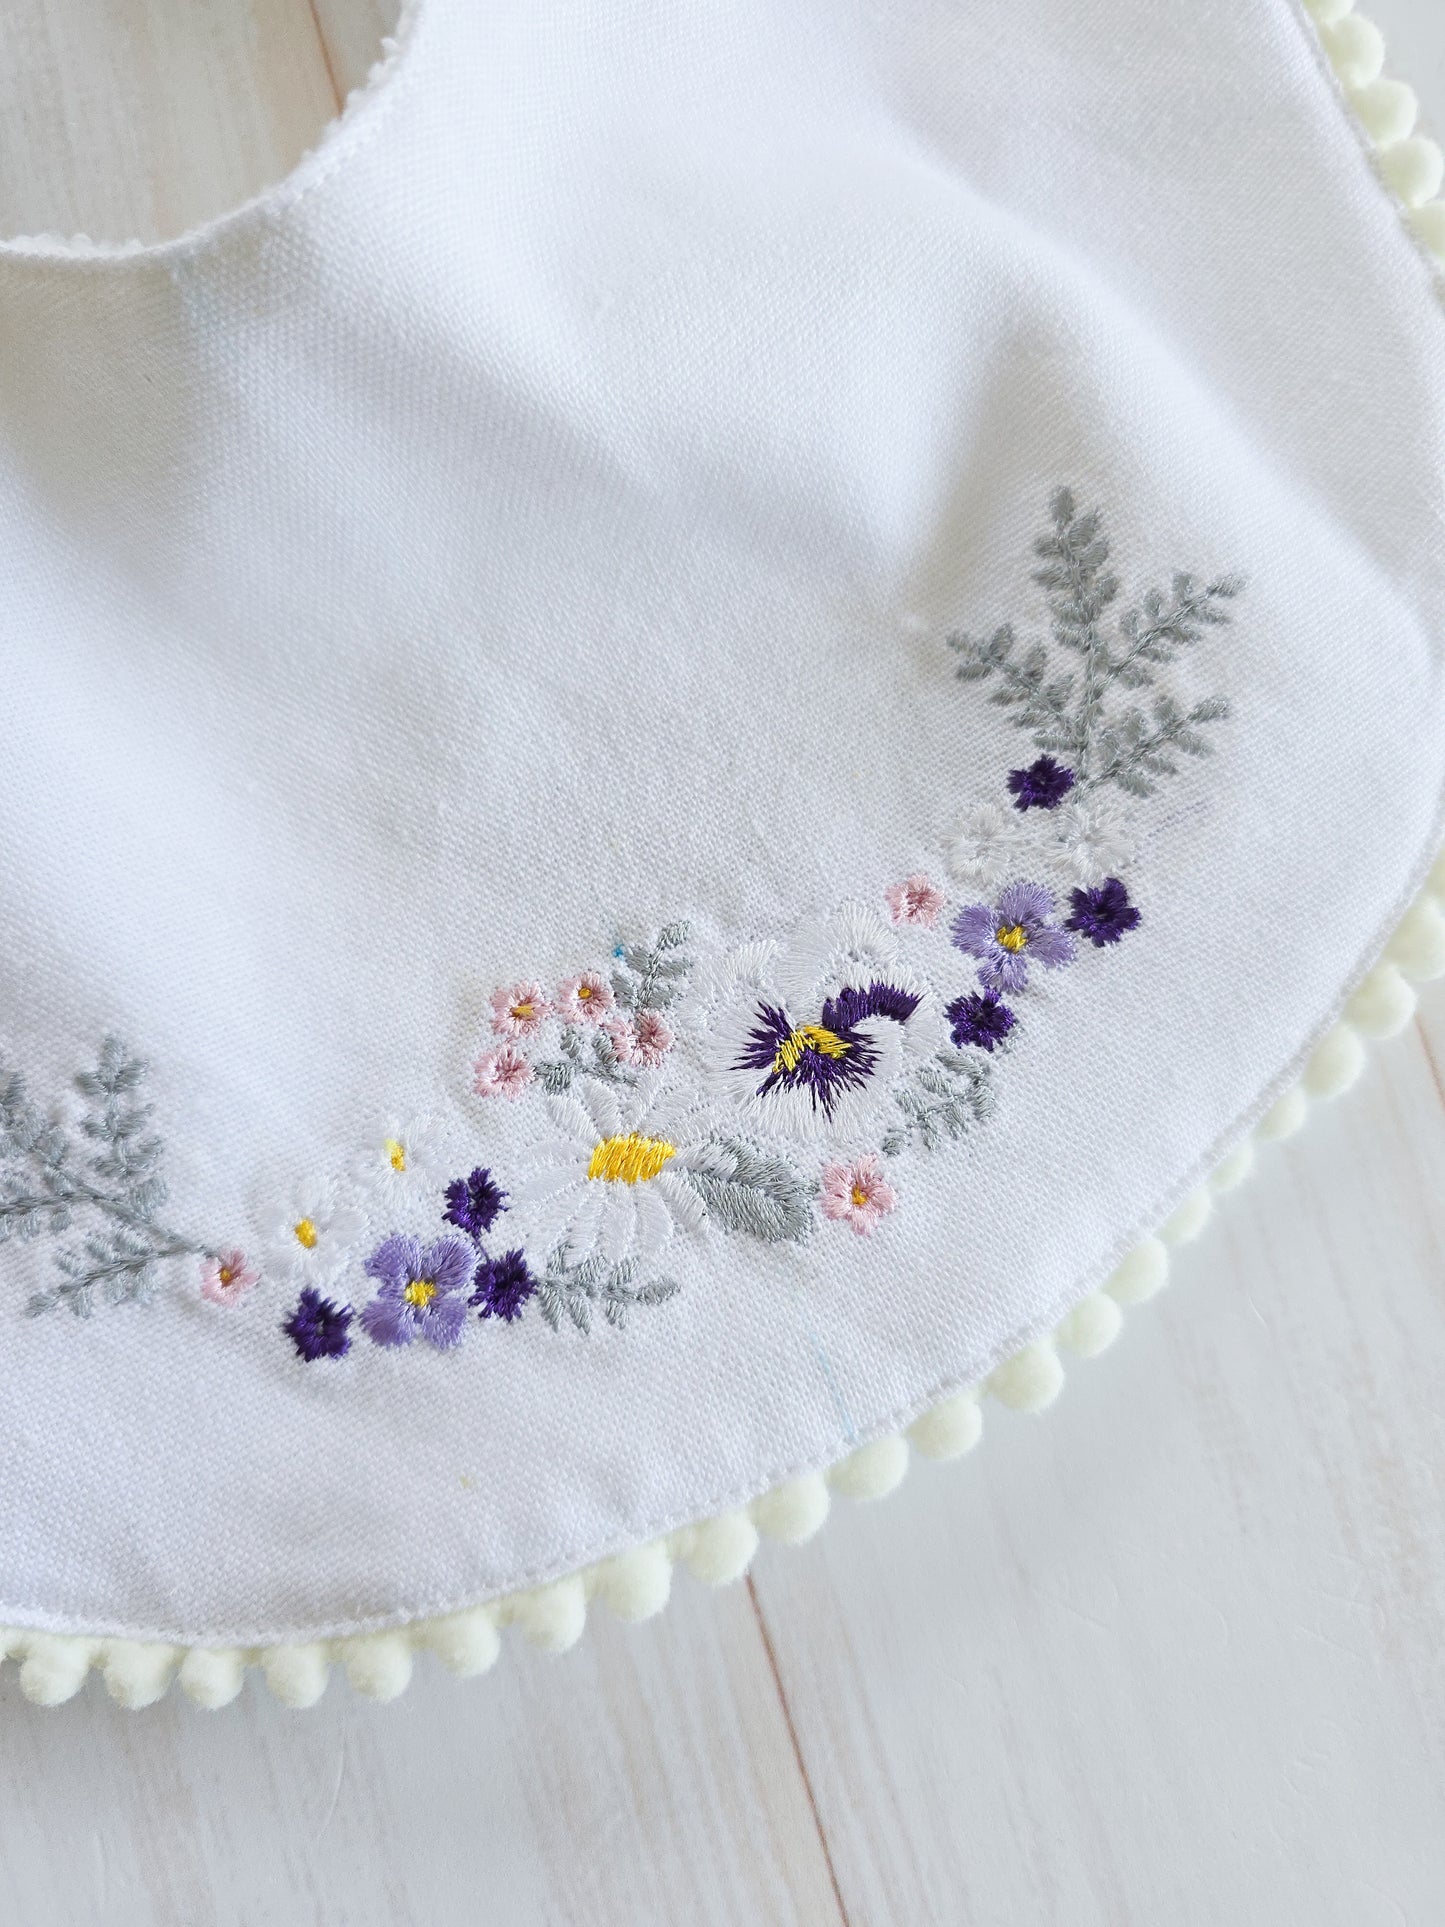 Round Bib- White linen with Flower embroidery